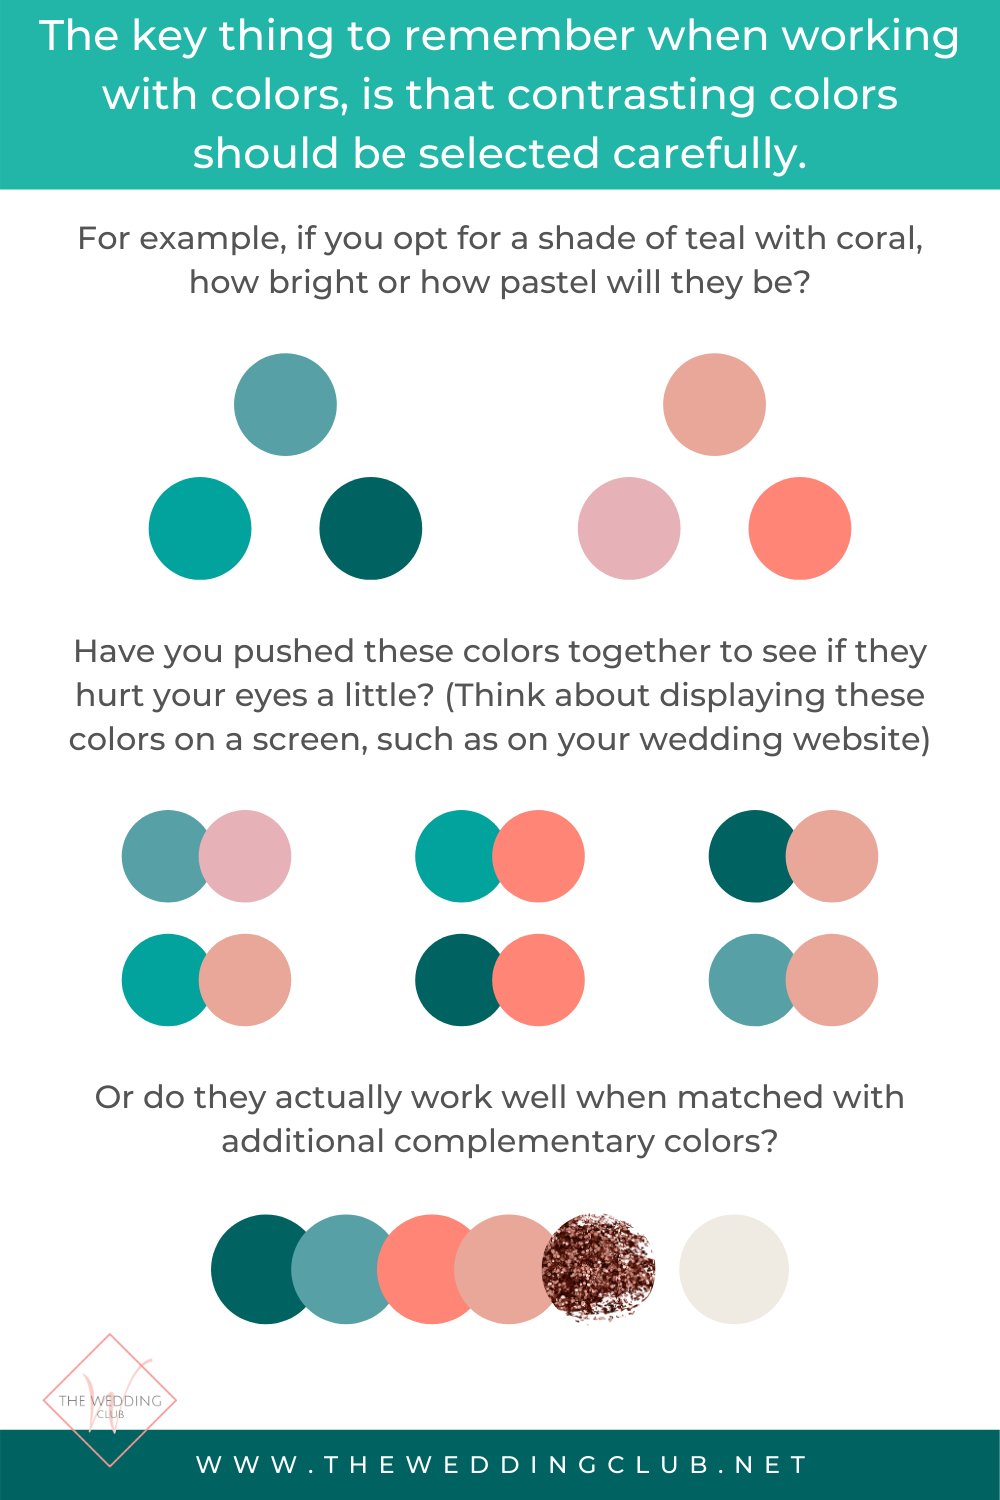 The key thing to remember when choosing colors for your wedding style, is to be careful when working with contrasting colors. Here is an infographic to display that example.